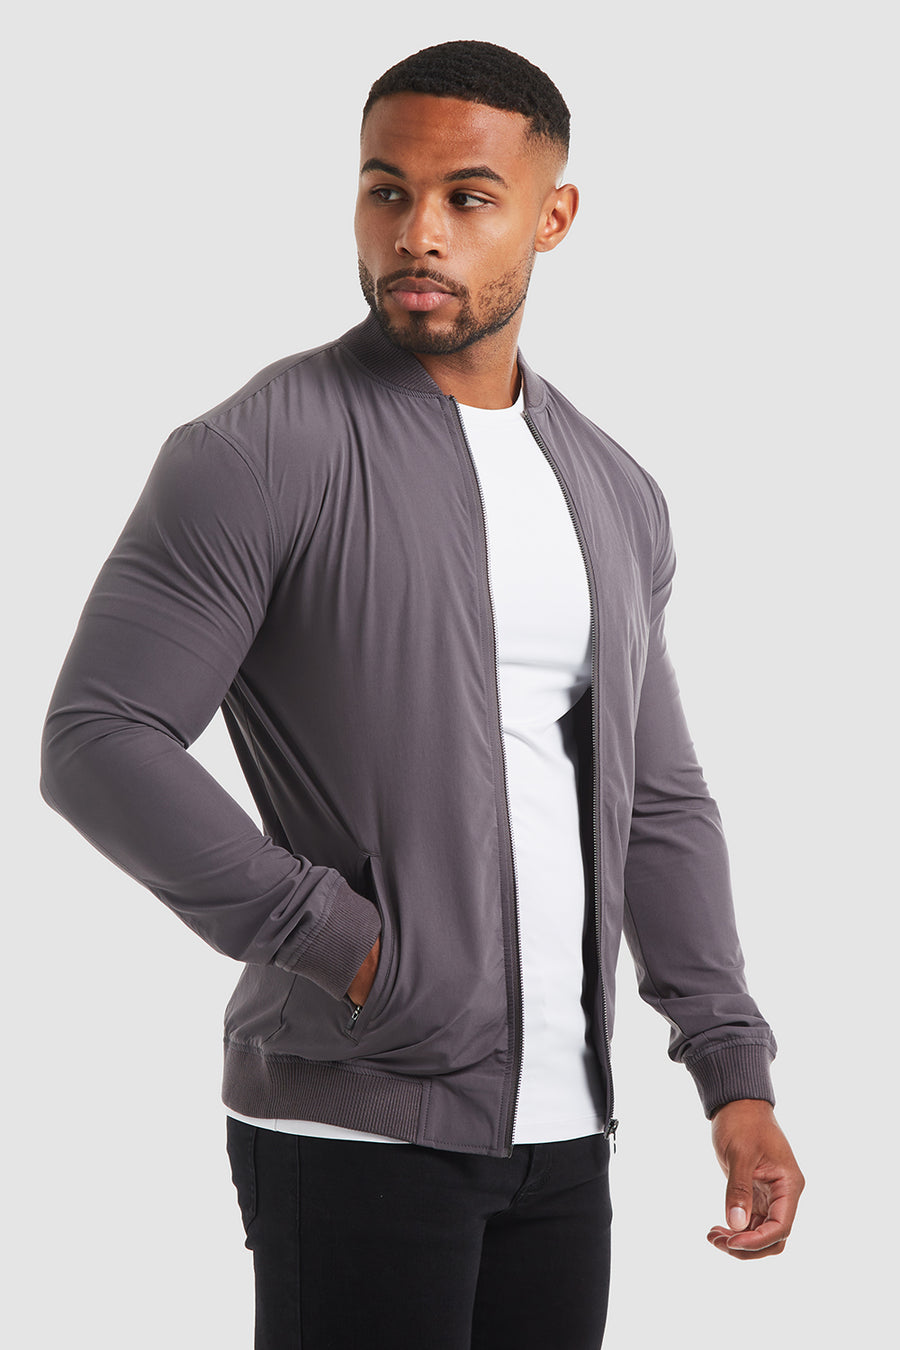 Athletic Fit Jackets and Blazers - TAILORED ATHLETE - USA